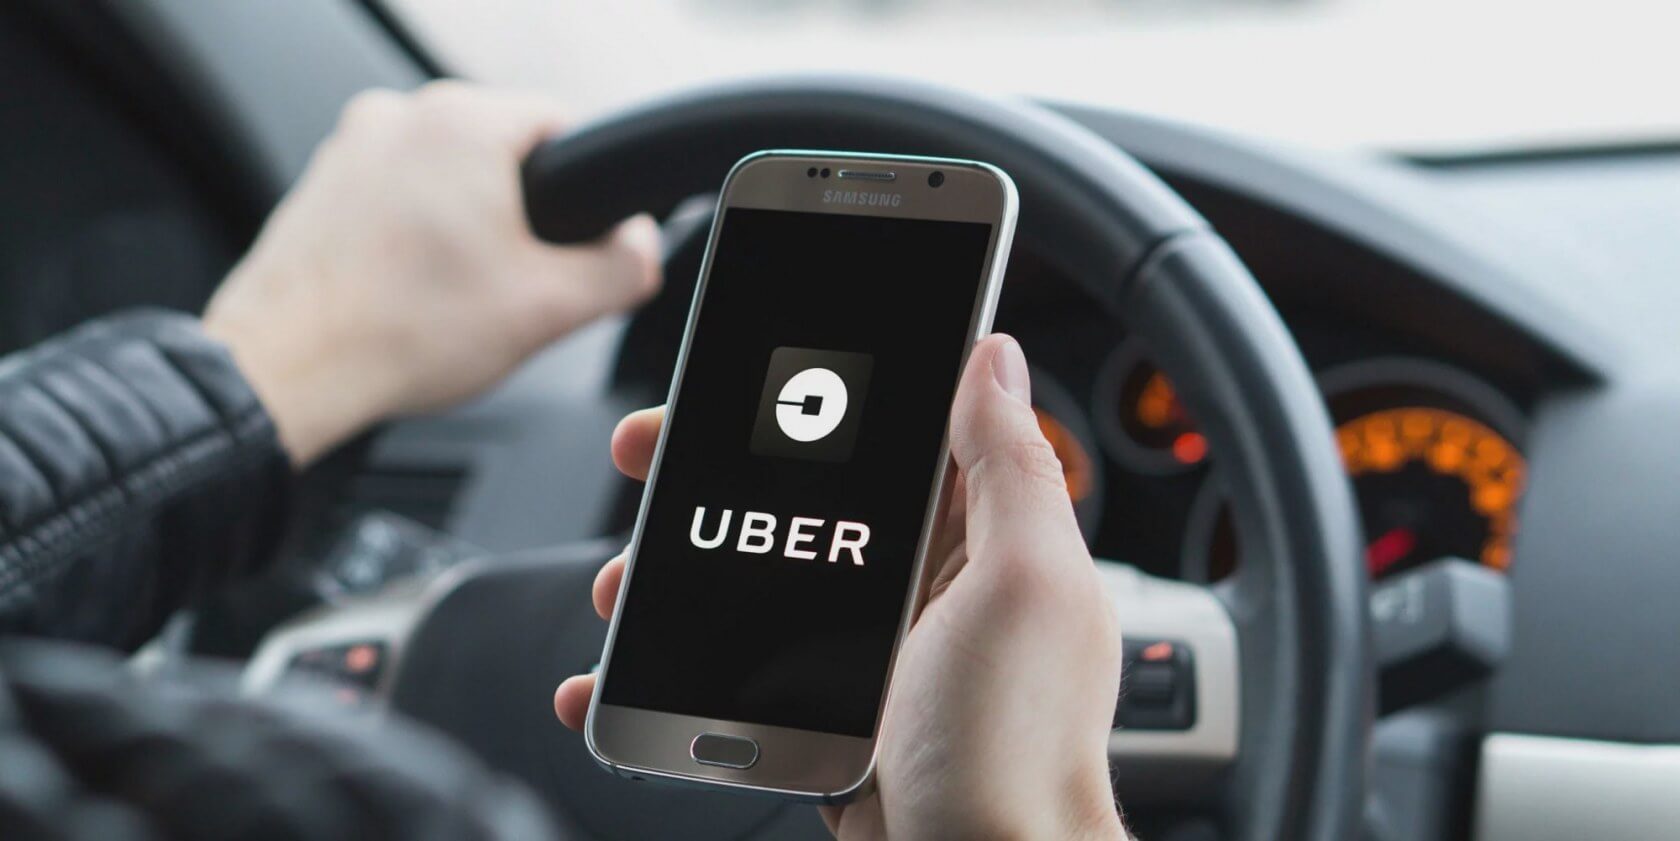 Defunct ride-sharing firm Sidecar sues Uber for using illegal market-dominating tactics